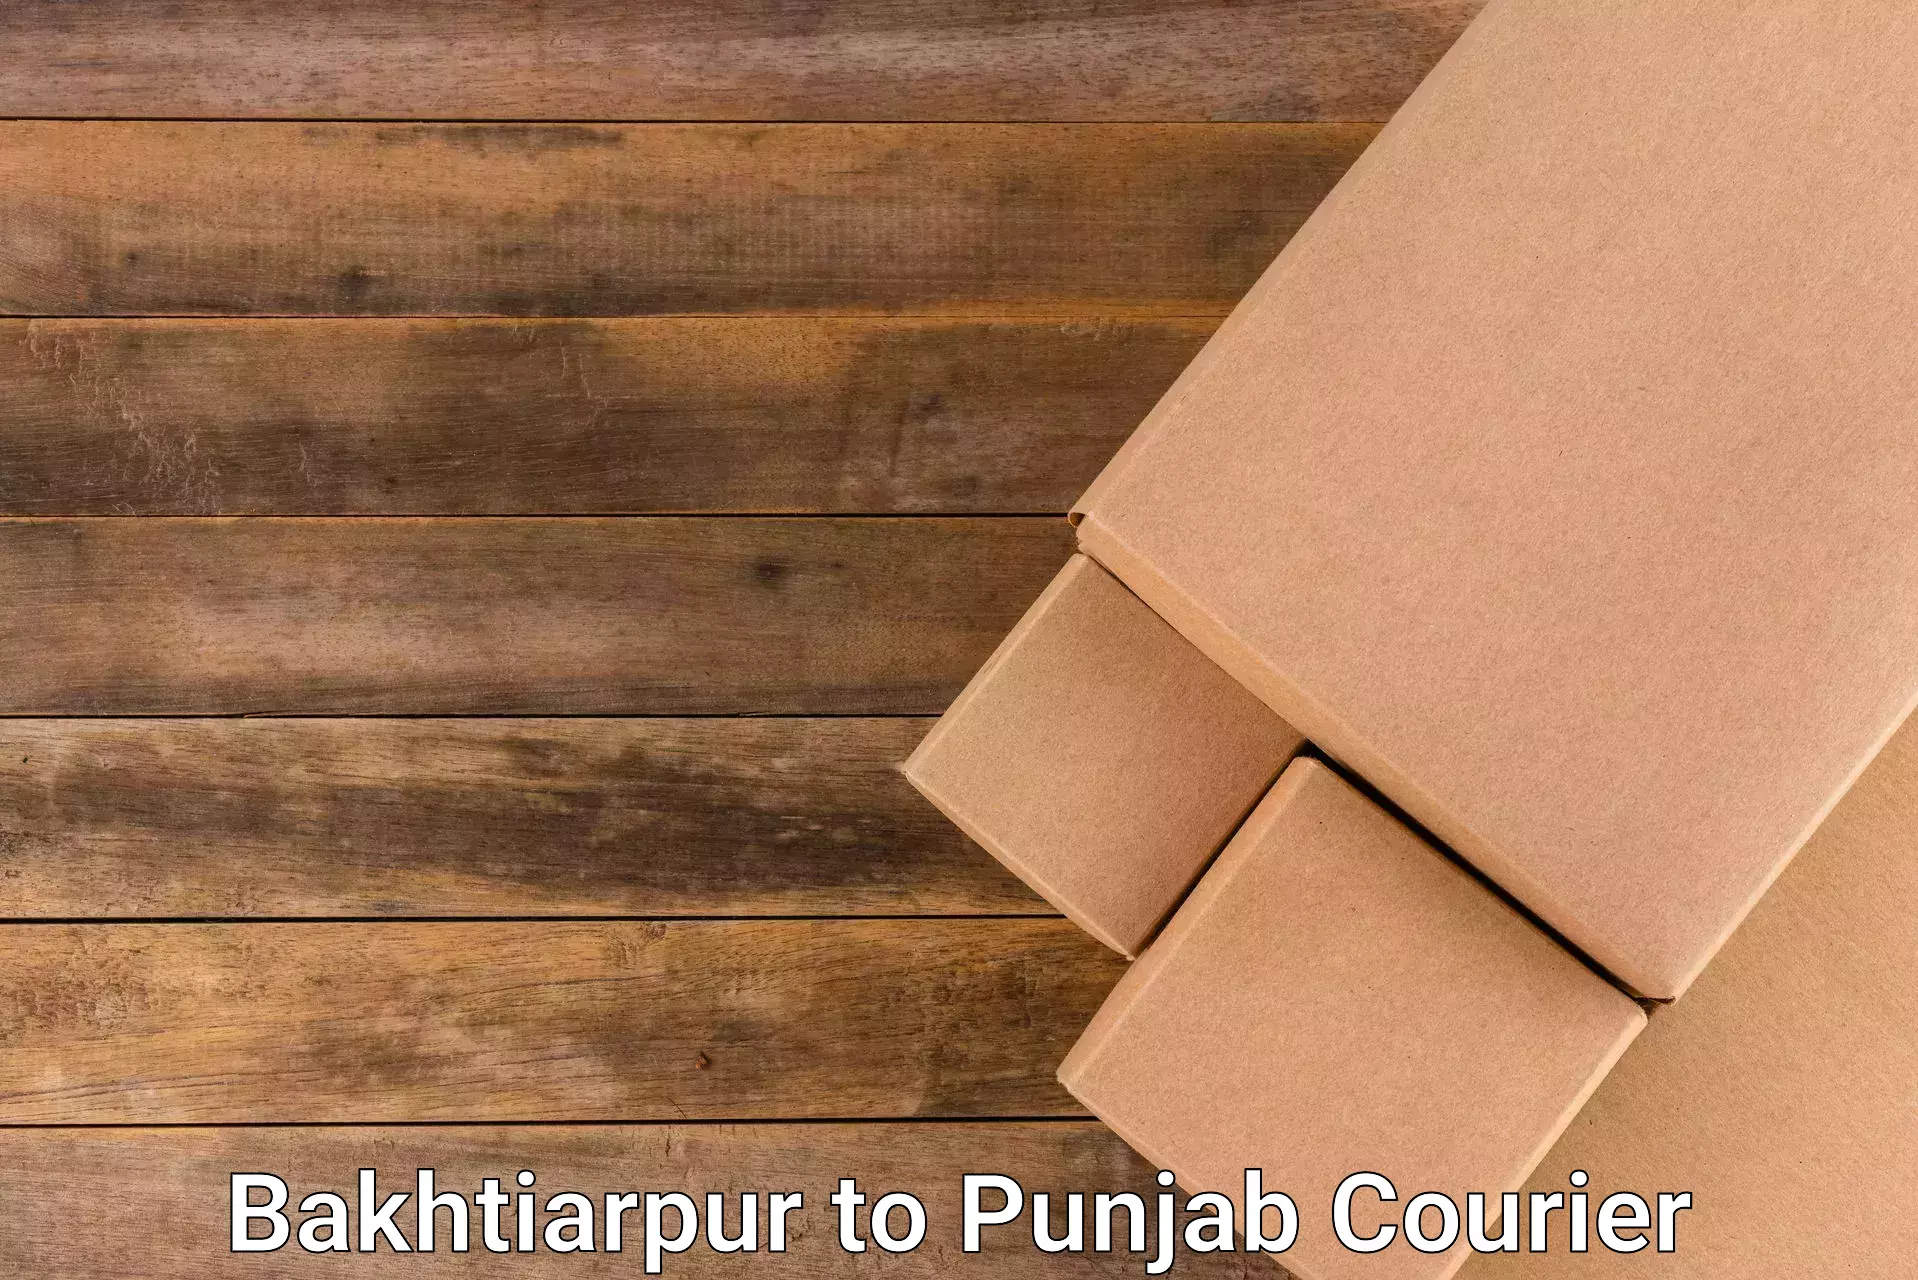 Overnight delivery services in Bakhtiarpur to Nabha